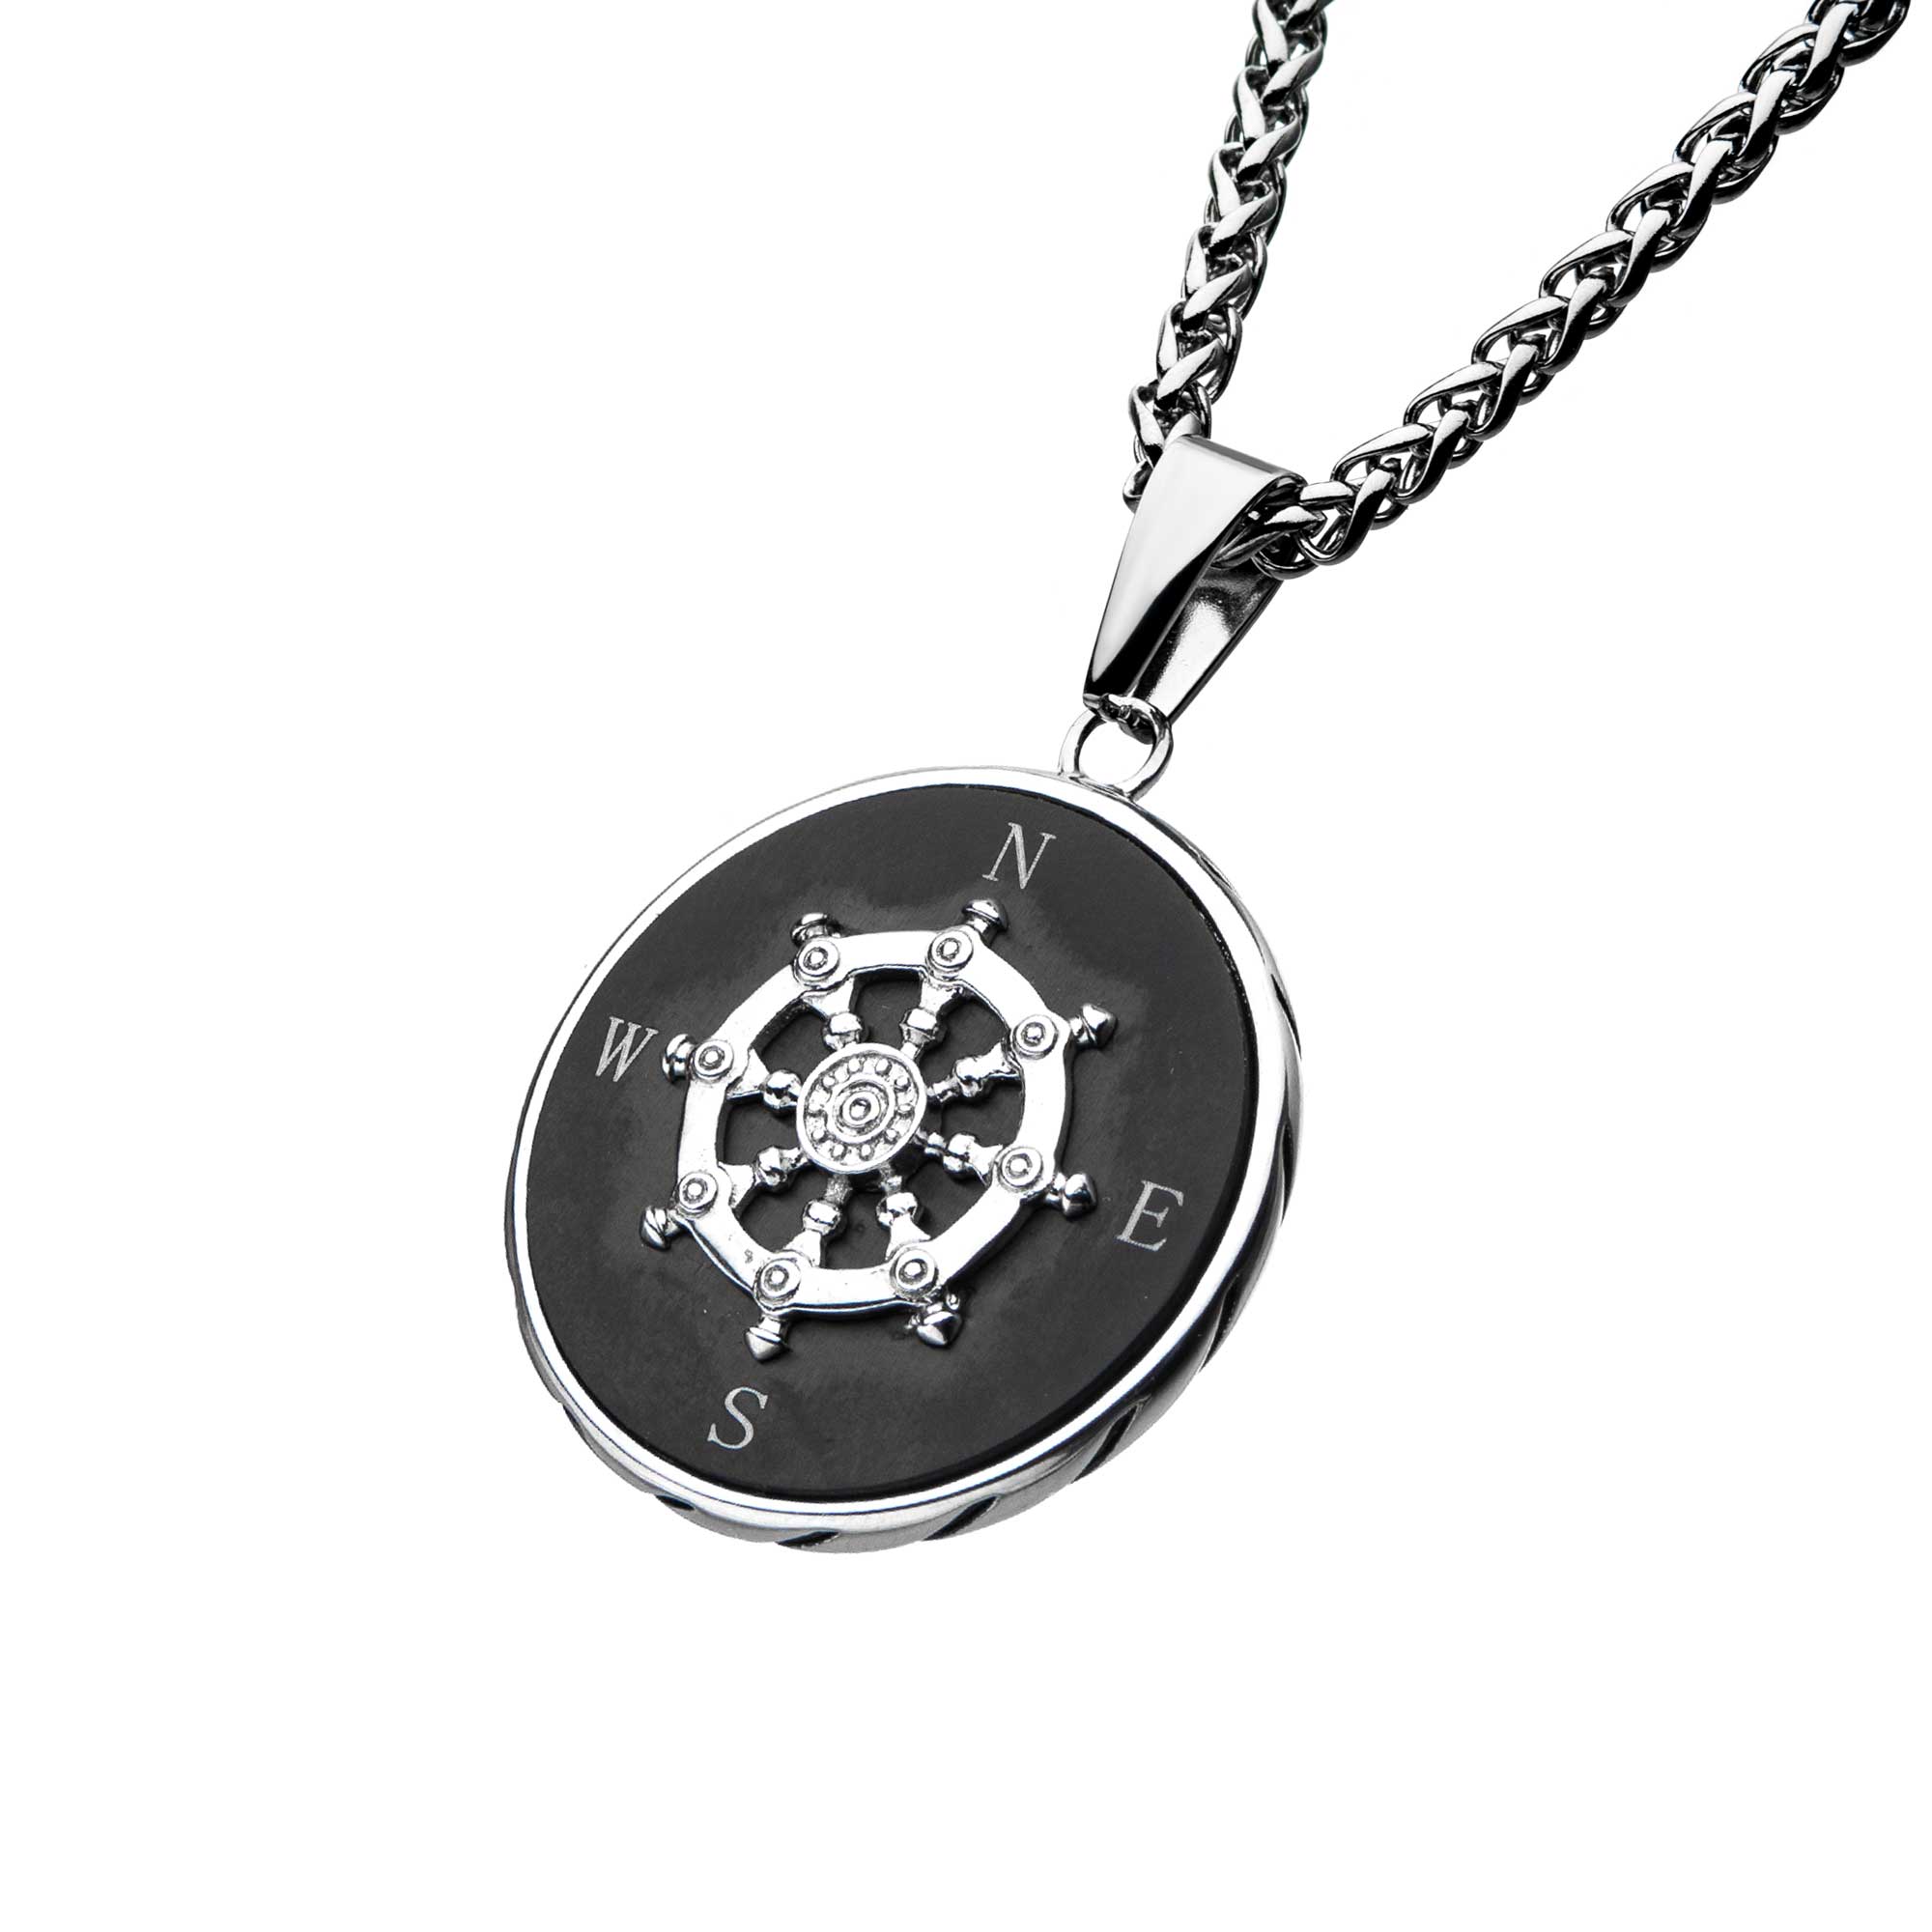 Stainless Steel Black Plated Ship's Wheel Compass Pendant with Chain Image 2 Enchanted Jewelry Plainfield, CT